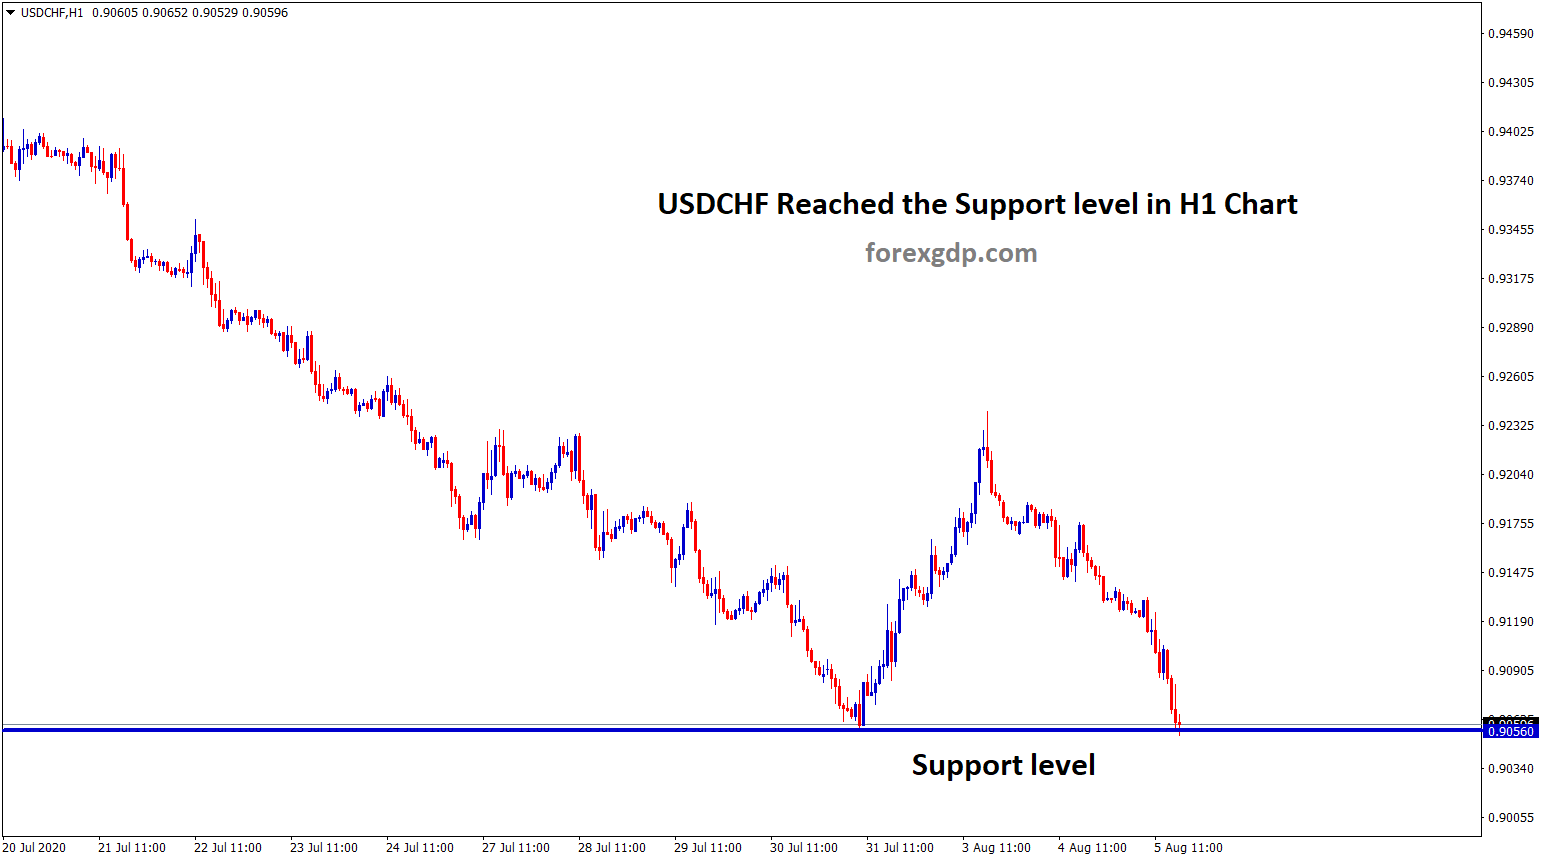 USDCHF reach support level in h1 chart